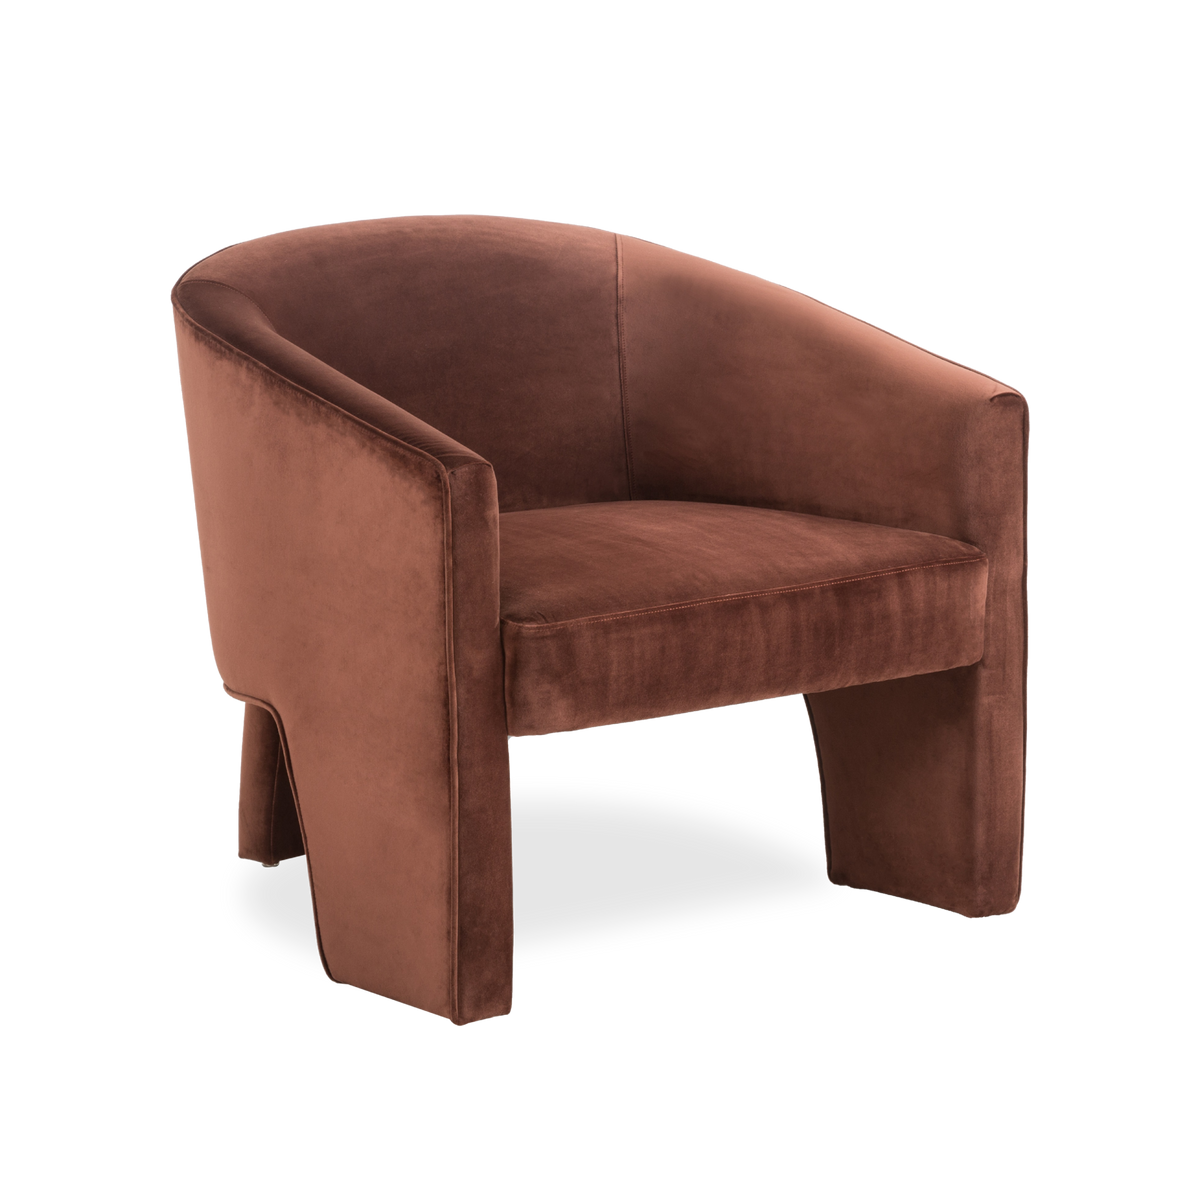 Well-tailored, the Culhane Armchair is stylistically unique.